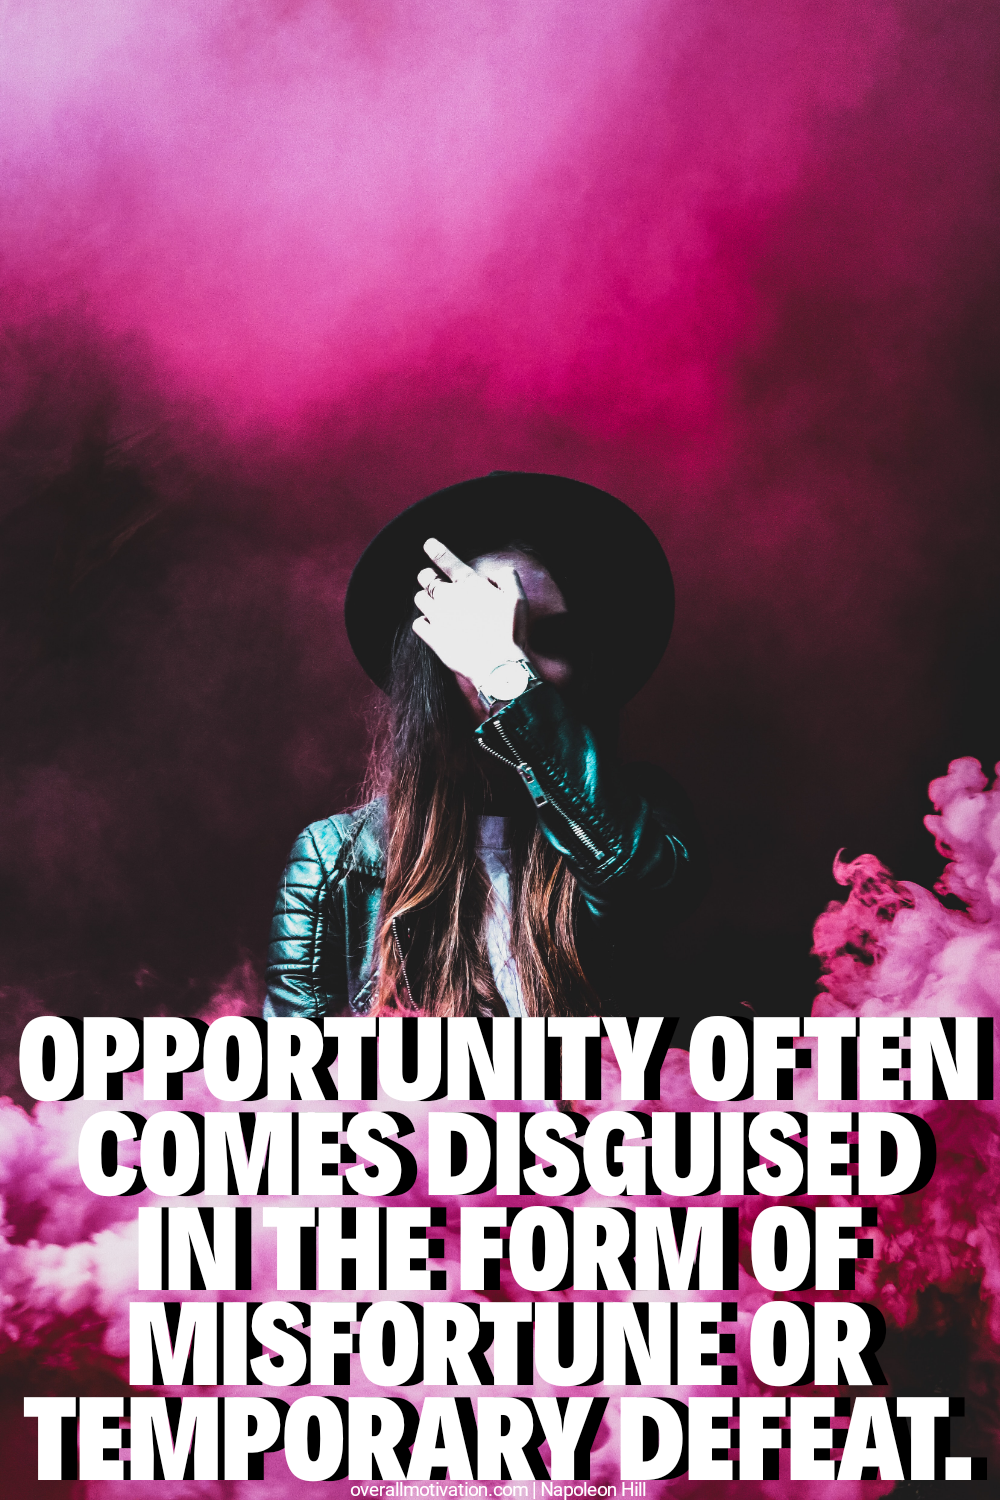 Opportunity often comes disguised...